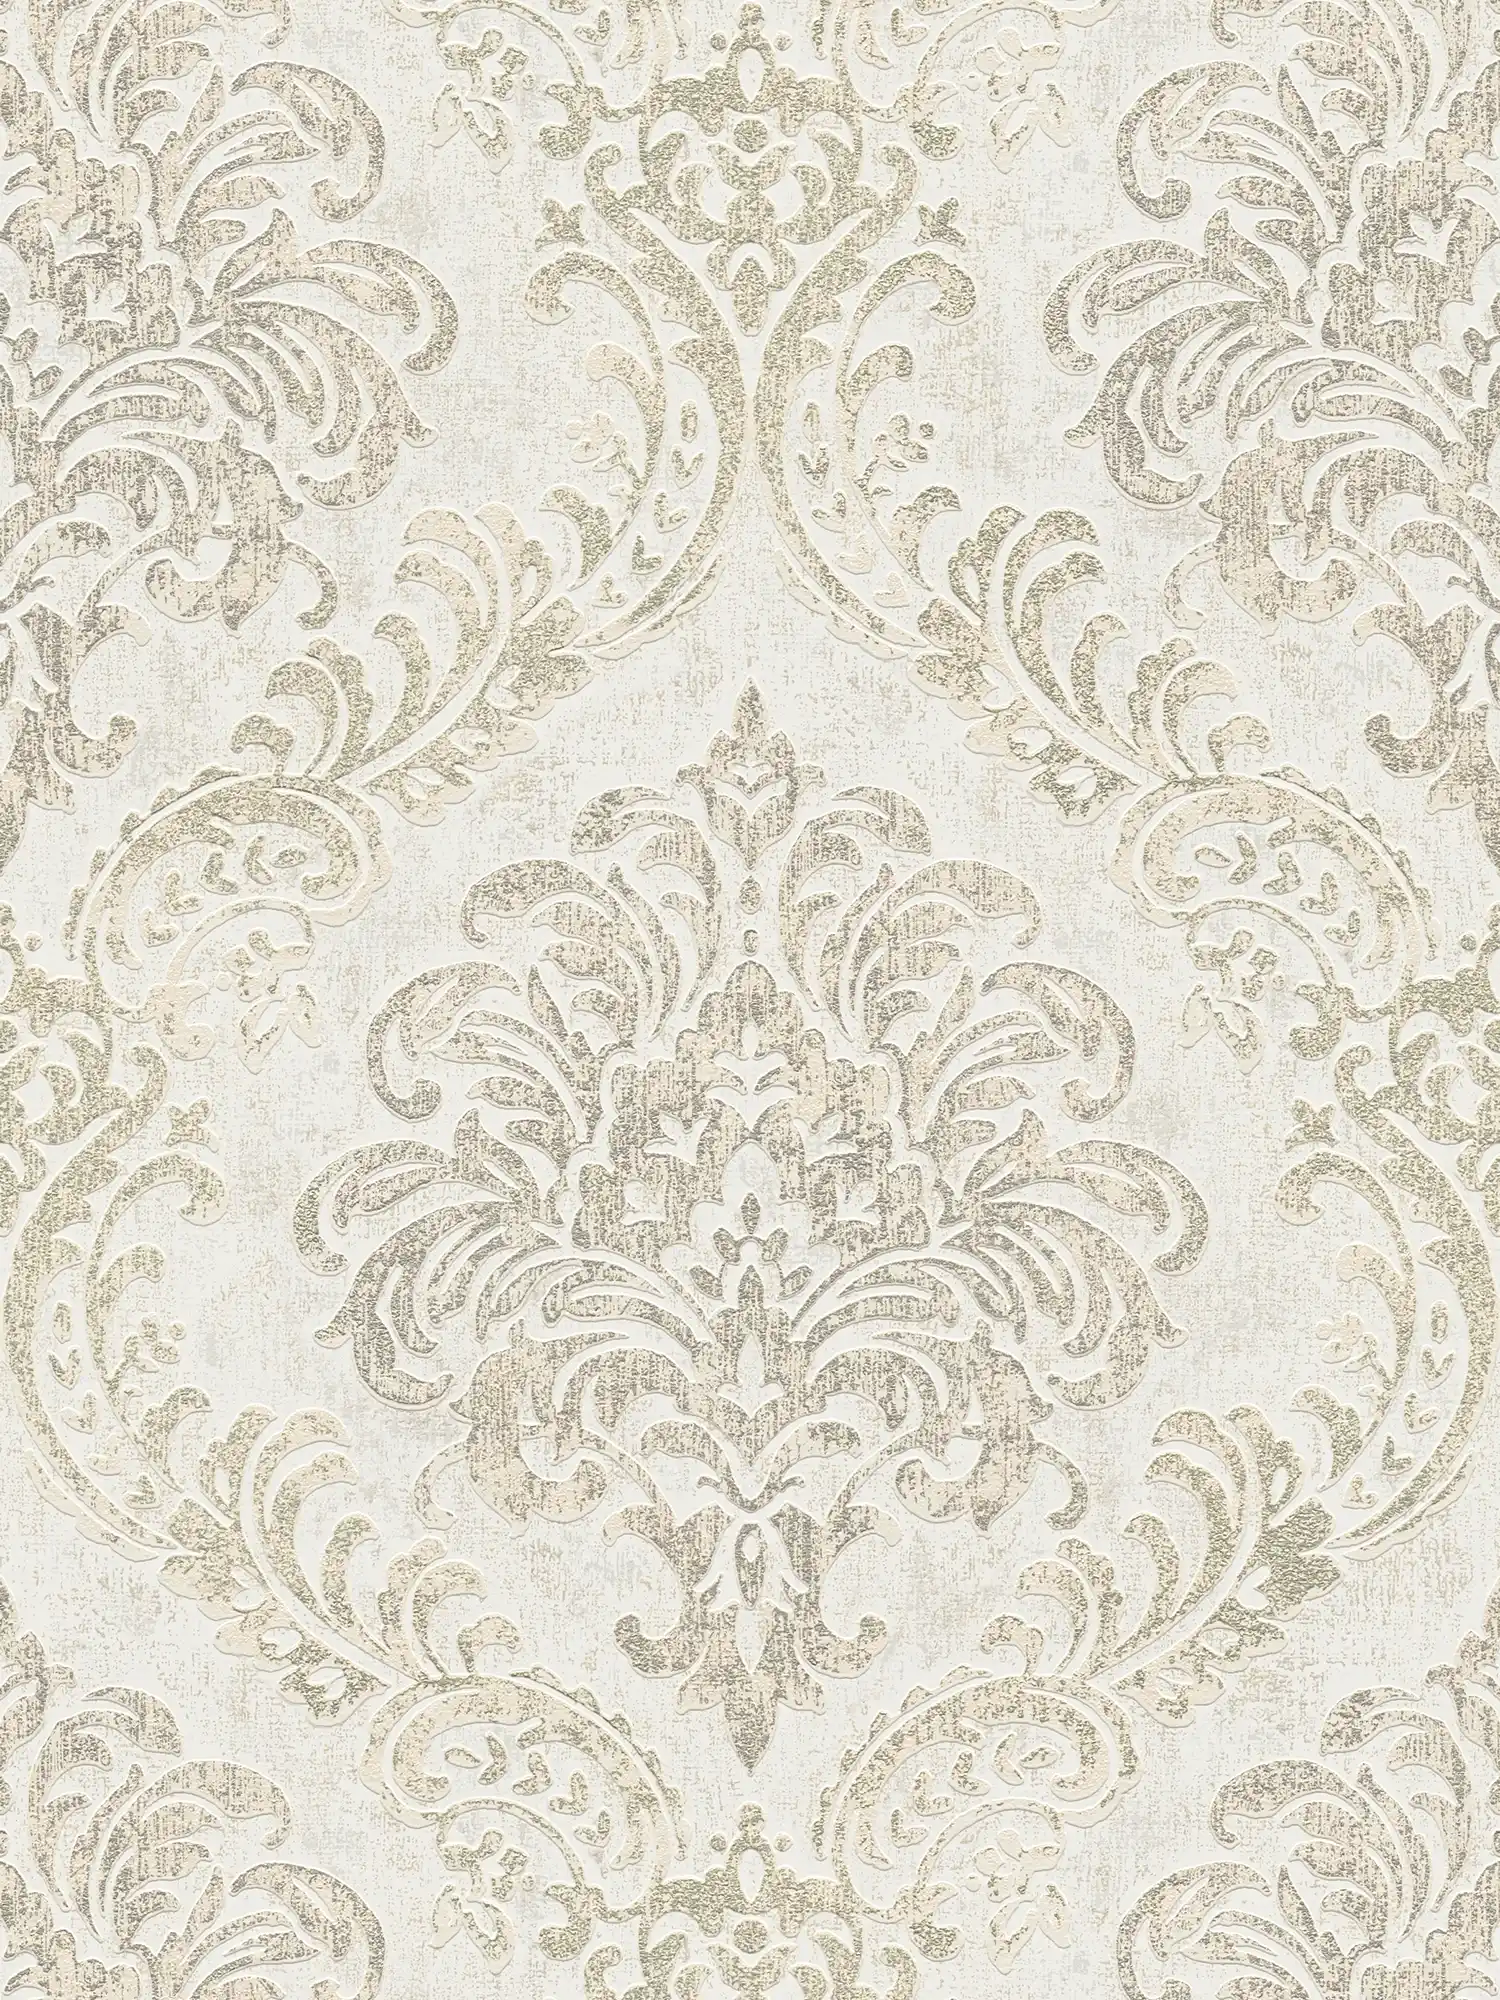 Baroque wallpaper with ornament & metallic look - white, silver, gold
